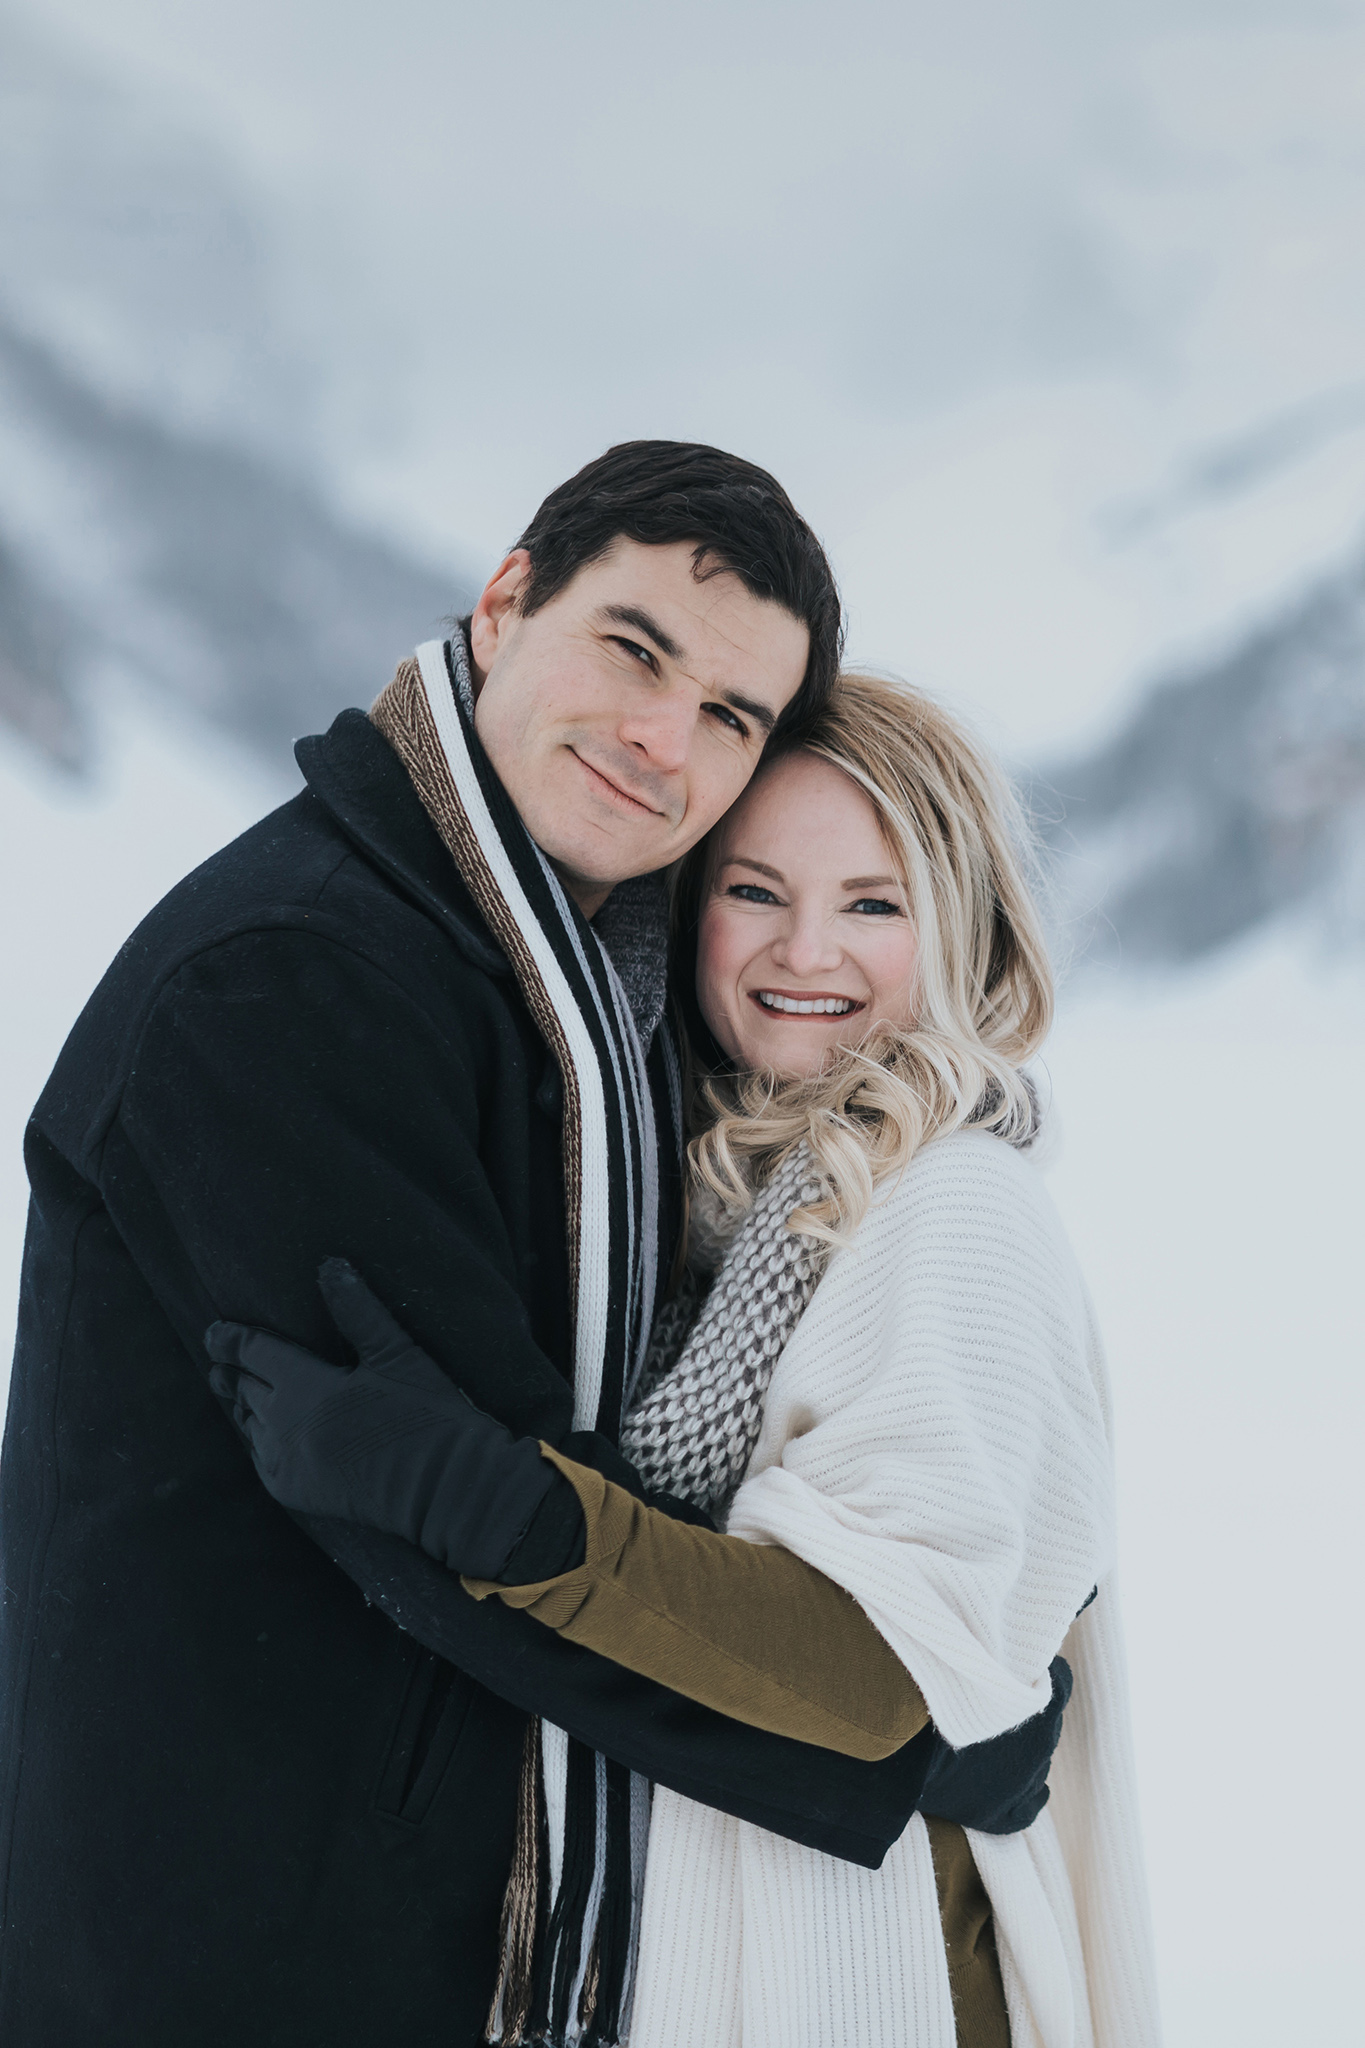 Lake Louise winter couples anniversary photos in the Canadian Rocky Mountains